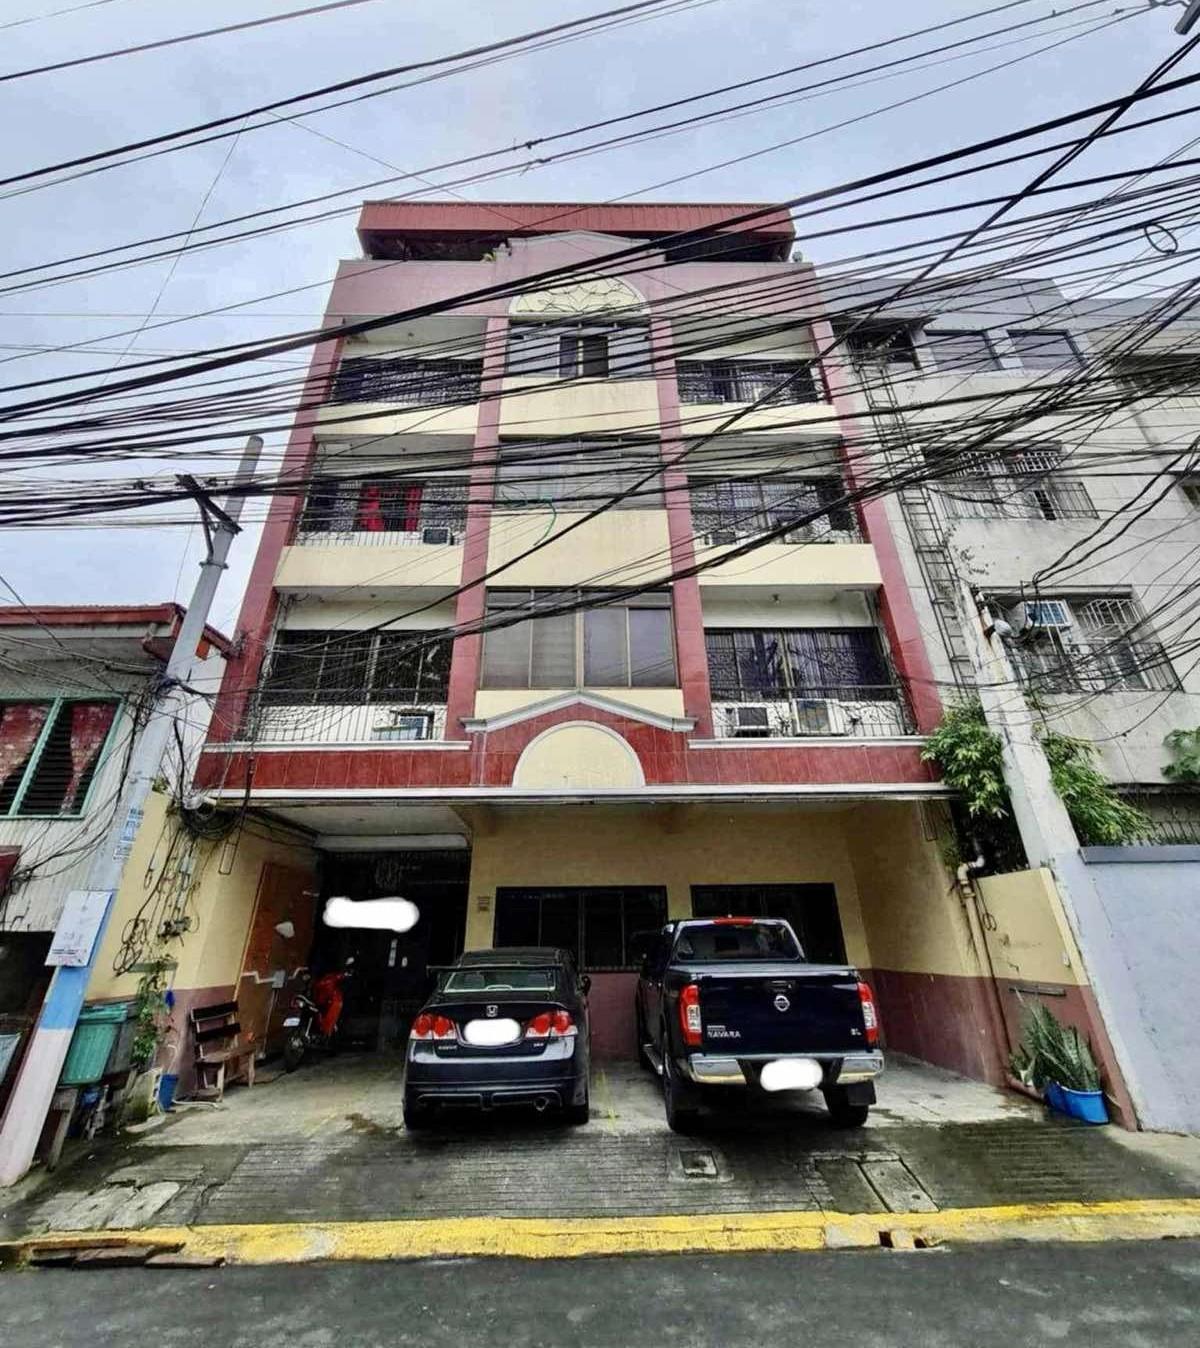 4-Storey Building with roof deck at Poblacion Makati - Image# 1